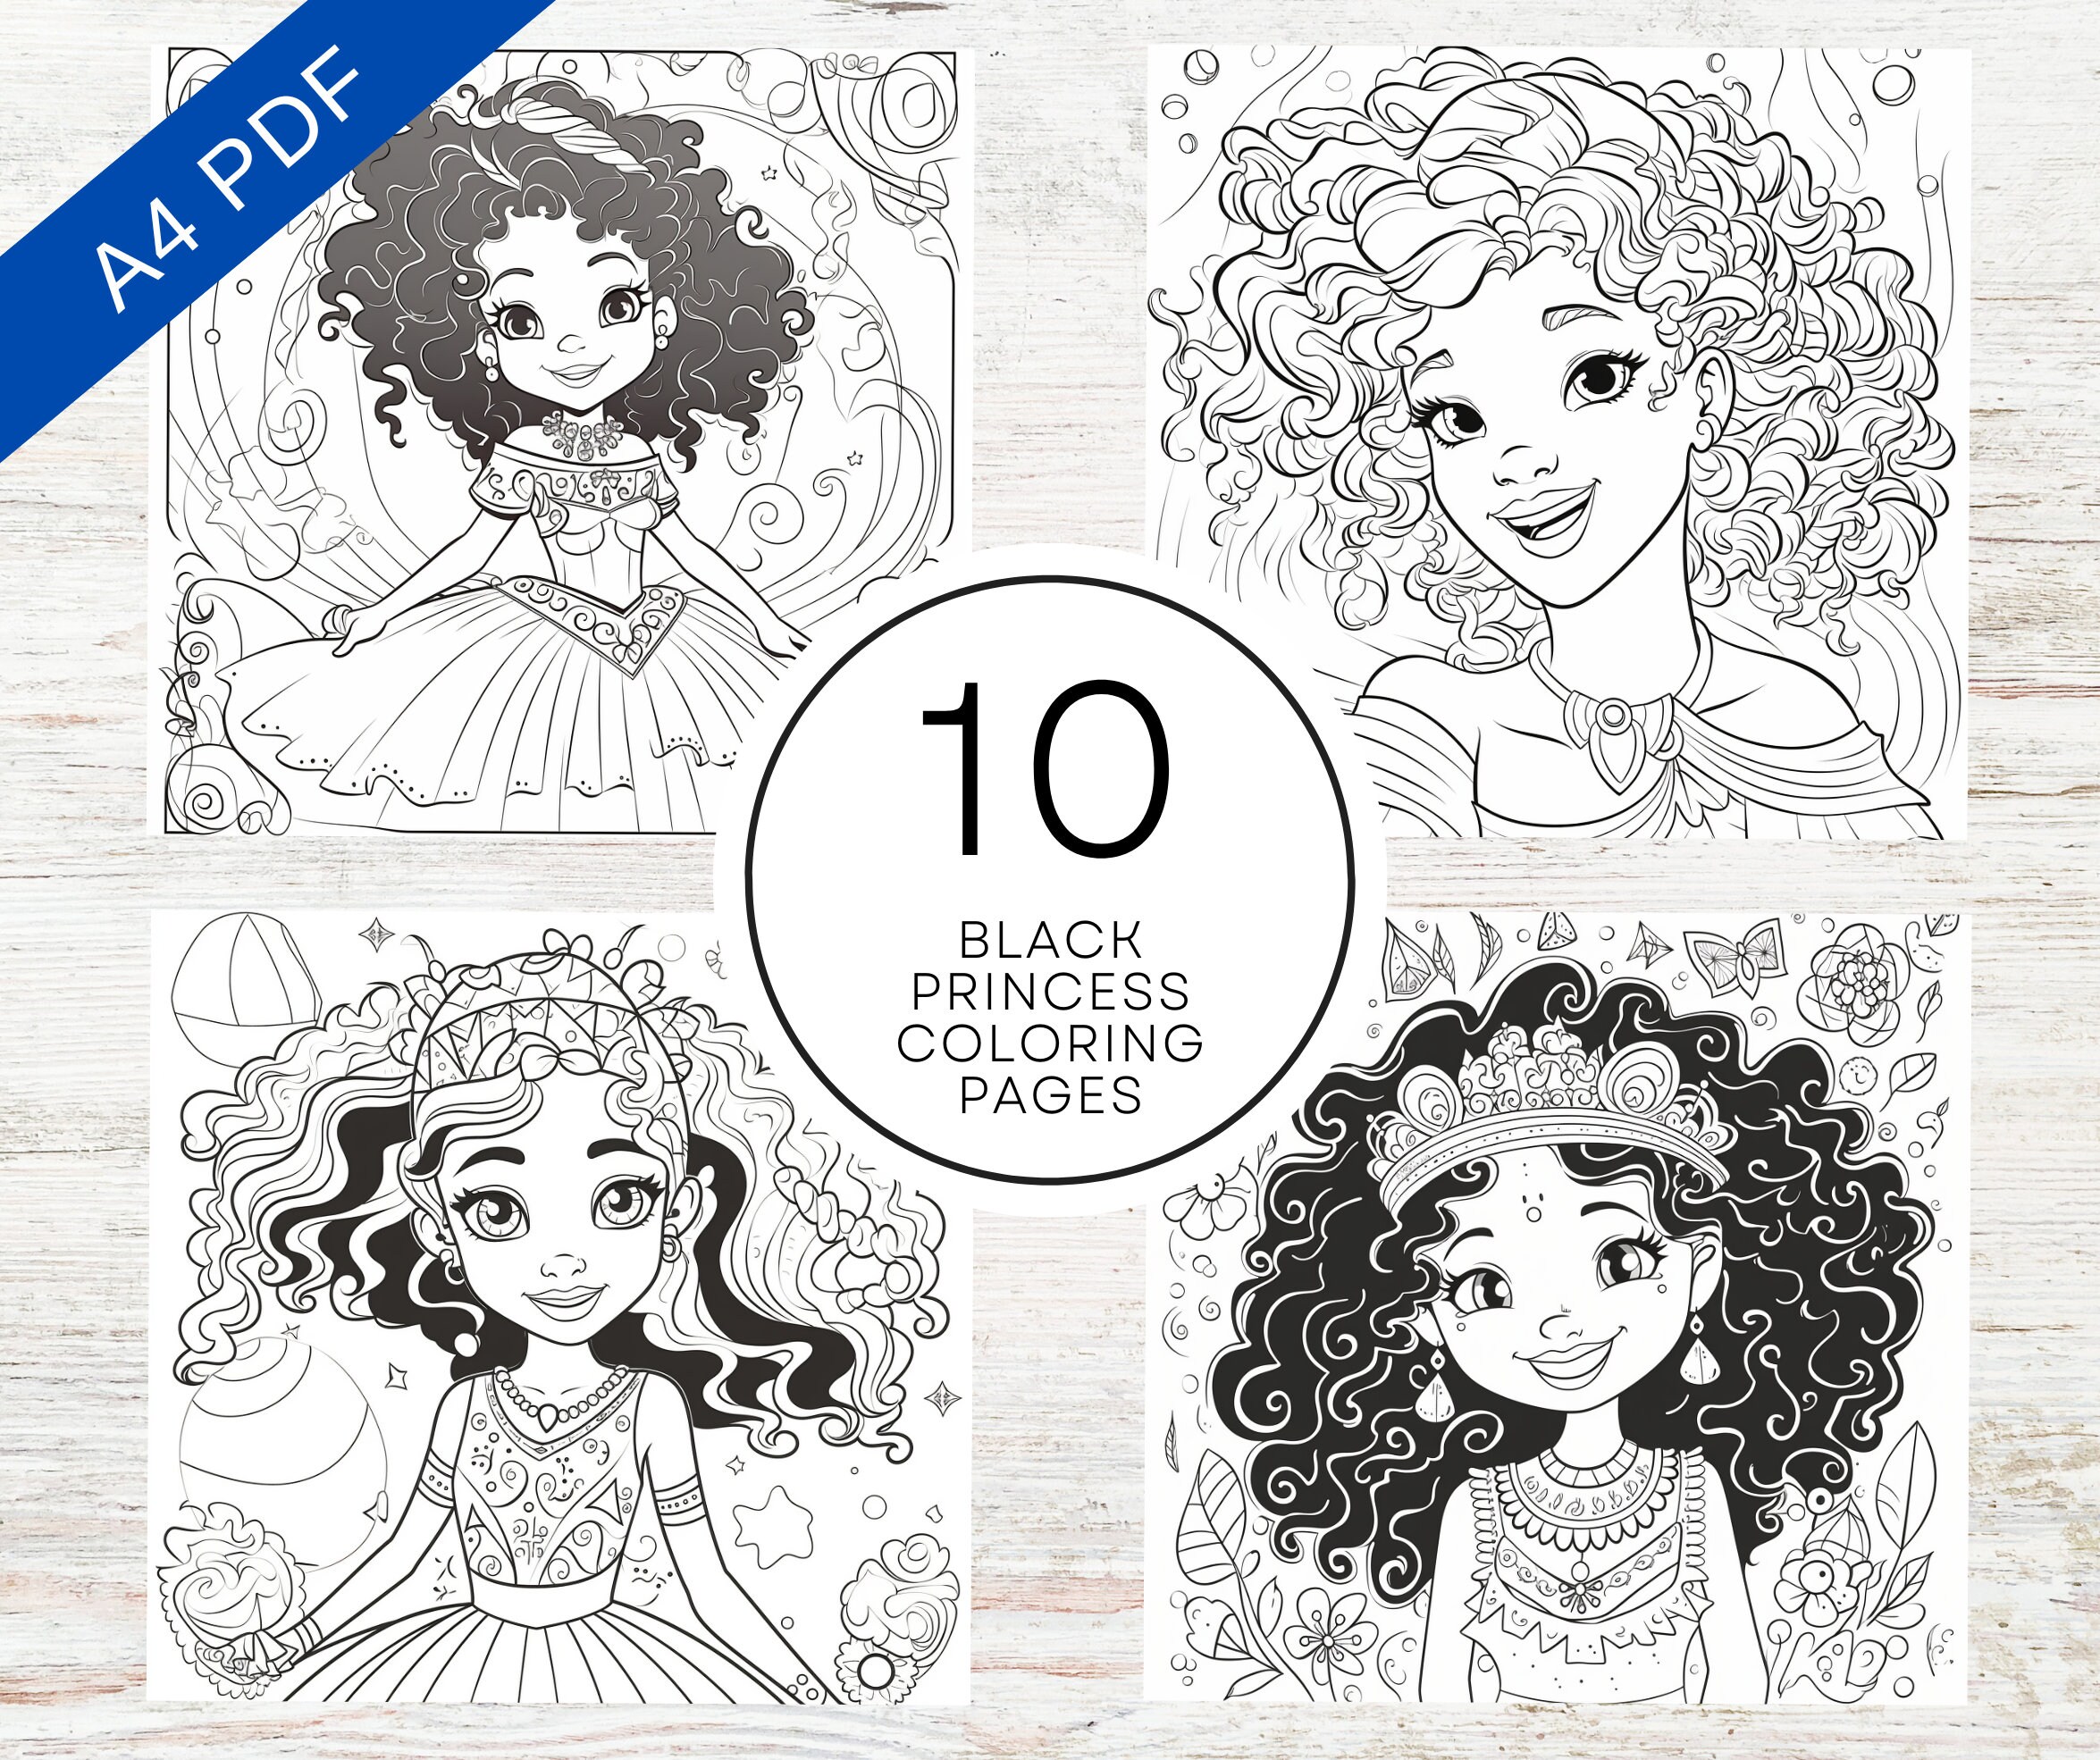 Black princess coloring pages printable pdf a inclusive cute coloring sheets for kids adults